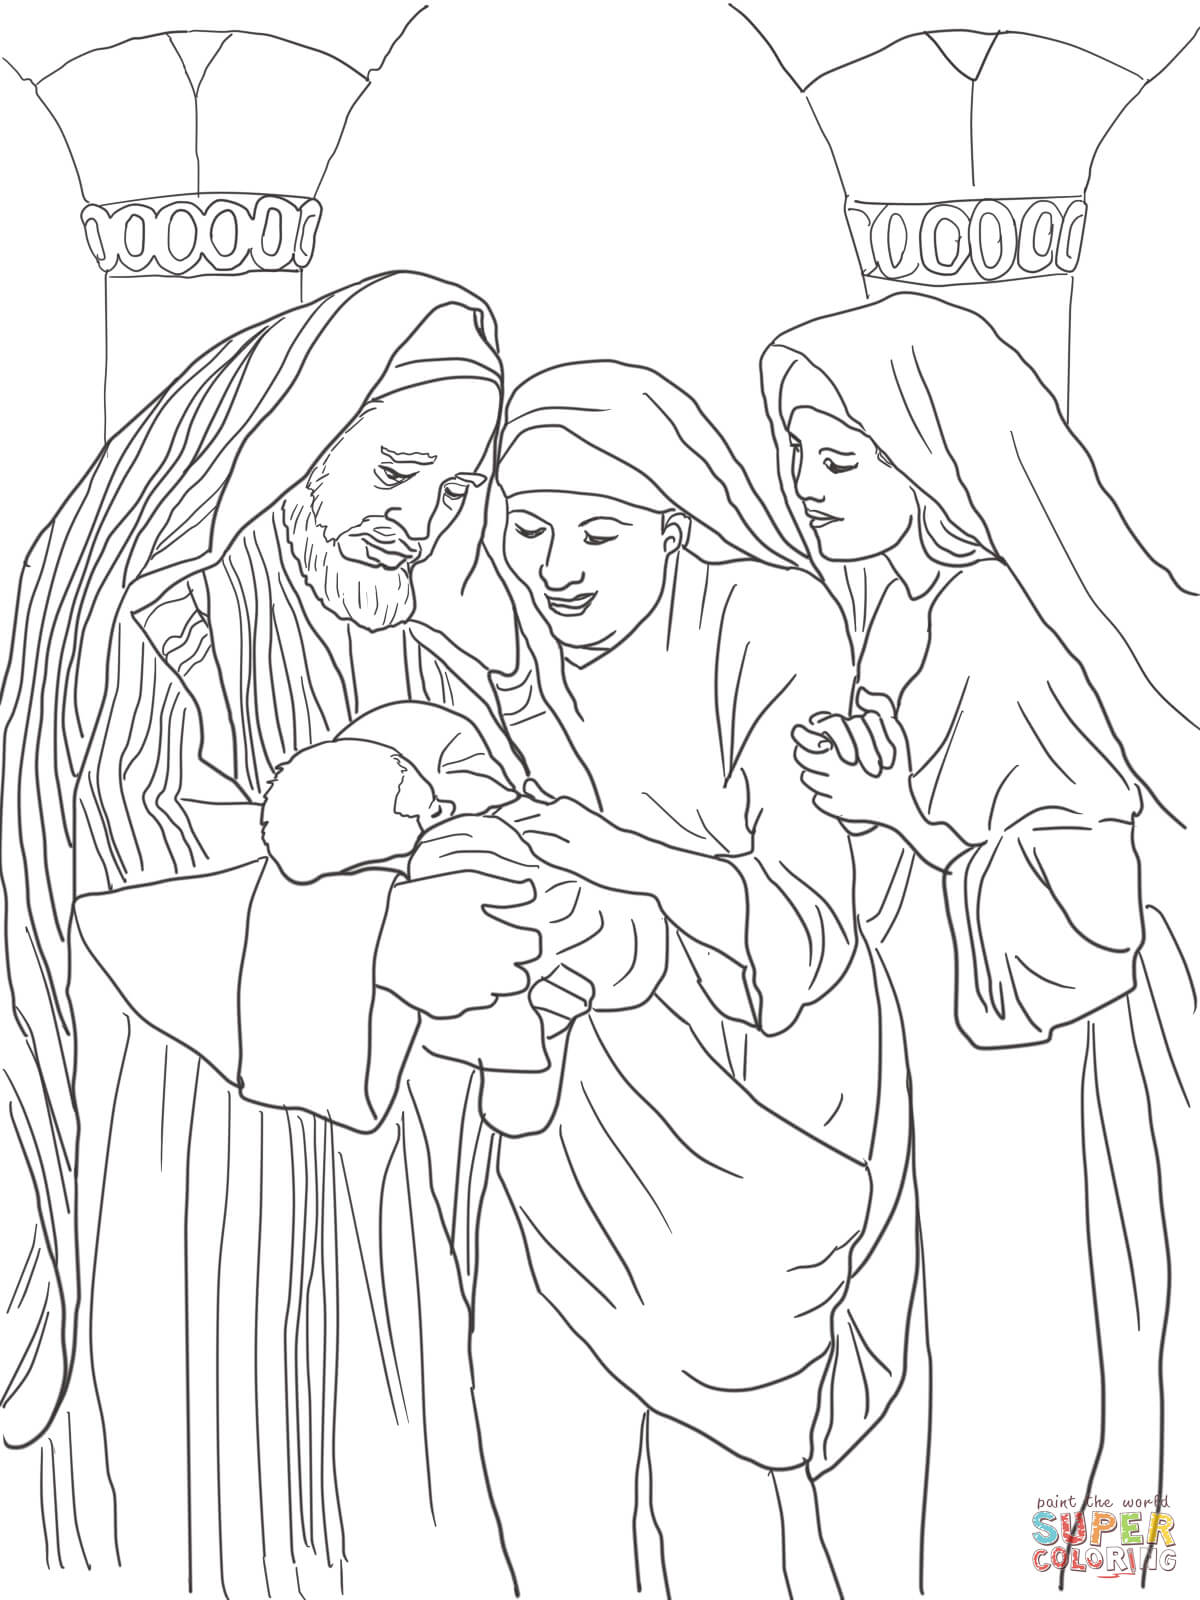 Zechariah, Elizabeth and Baby John the Baptist coloring page